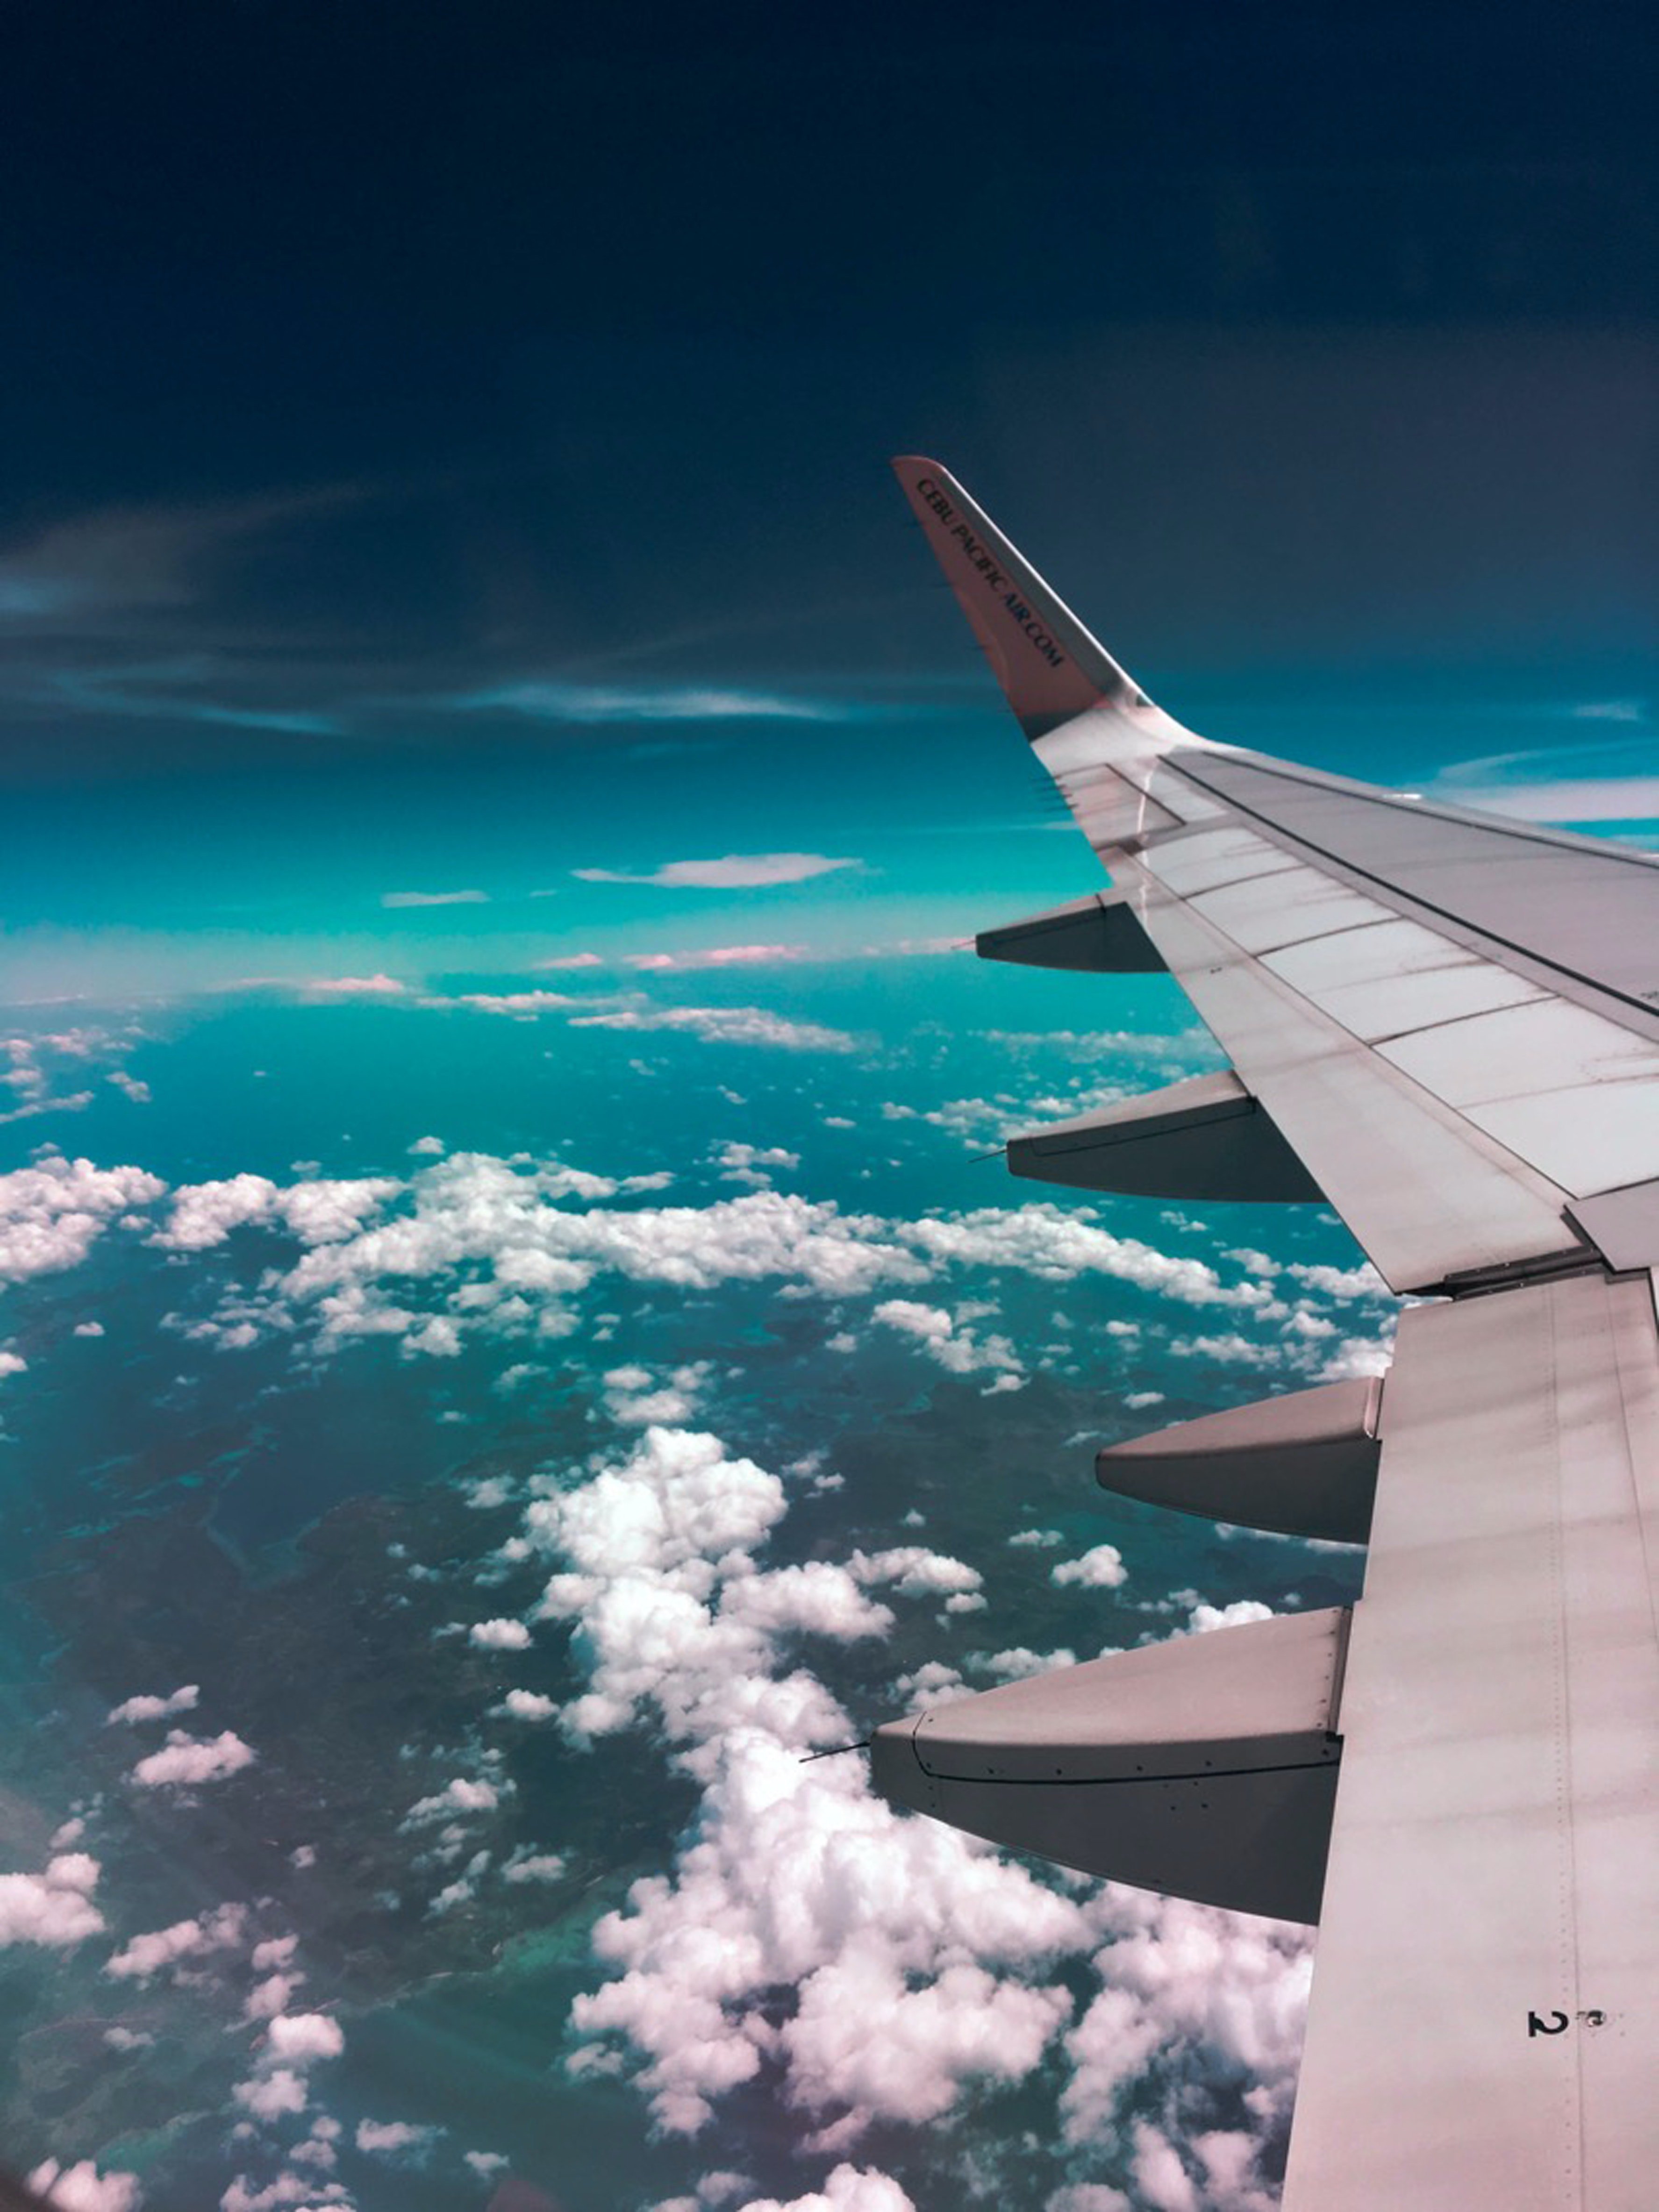 The airplane climbed too high and passed the pearly gates of heaven. | Photo: Pexels